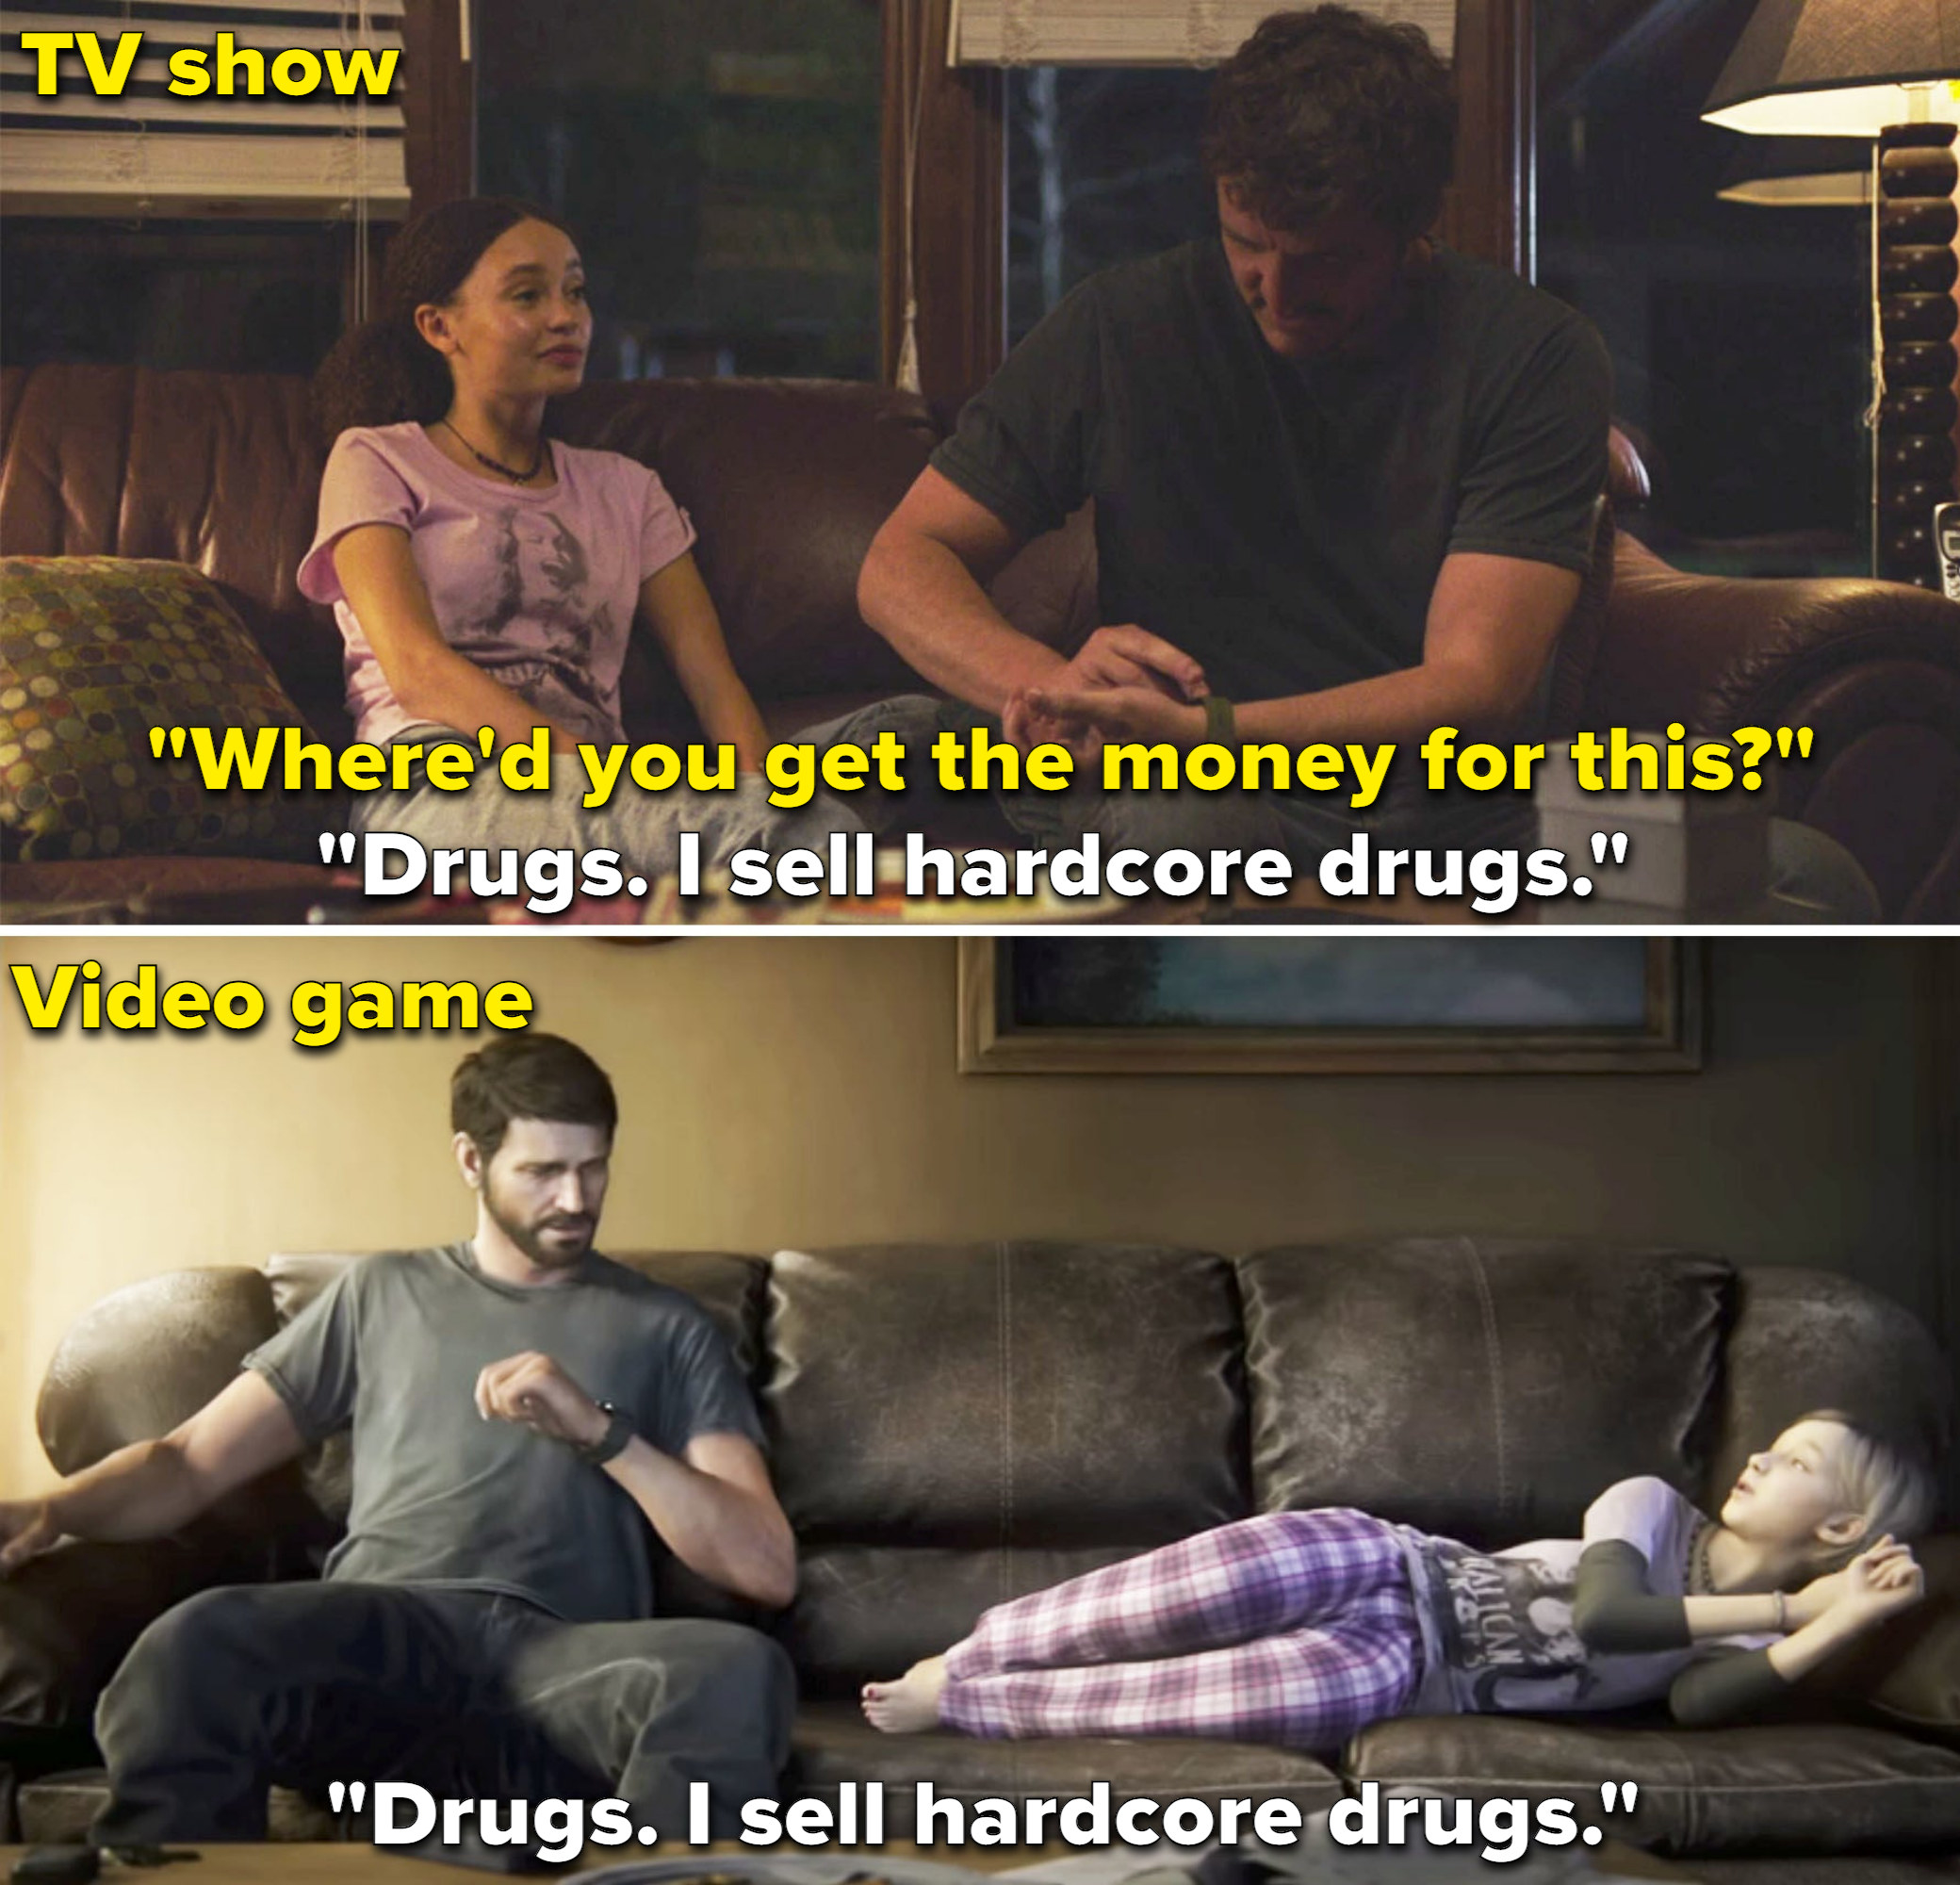 Sarah telling Joel, &quot;Drugs. I sell hardcore drugs&quot; in the show vs game